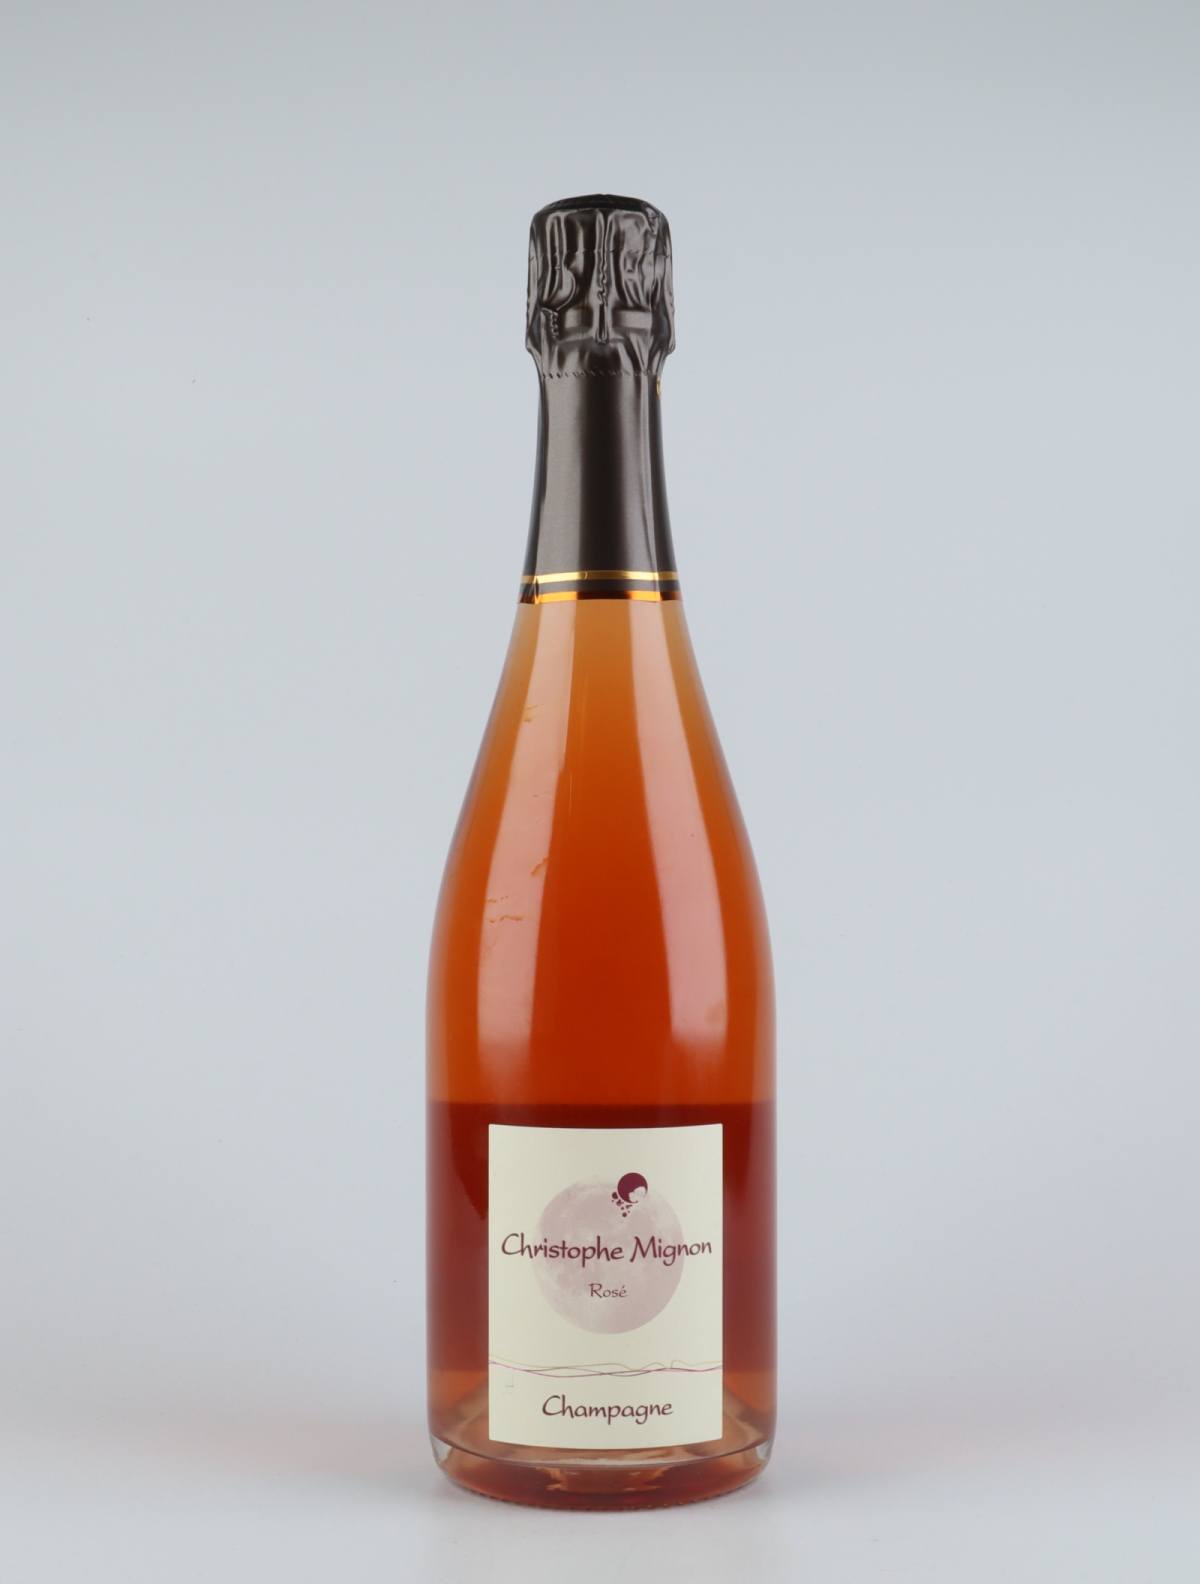 A bottle N.V. Rosé Pur Meunier Sparkling from Christophe Mignon, Champagne in France